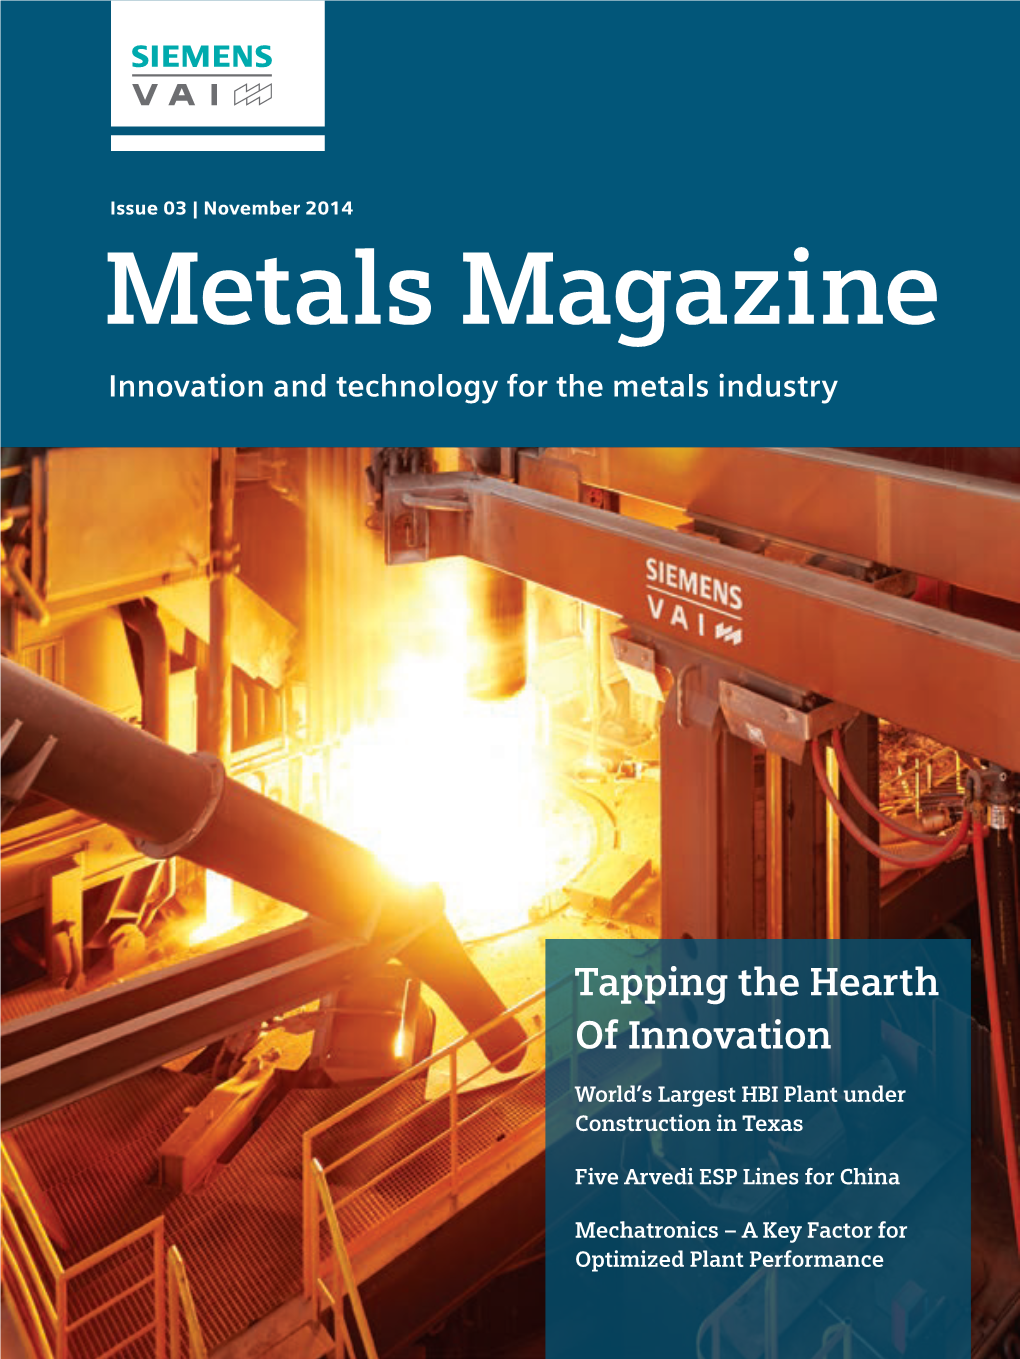 Metals Magazine Innovation and Technology for the Metals Industry